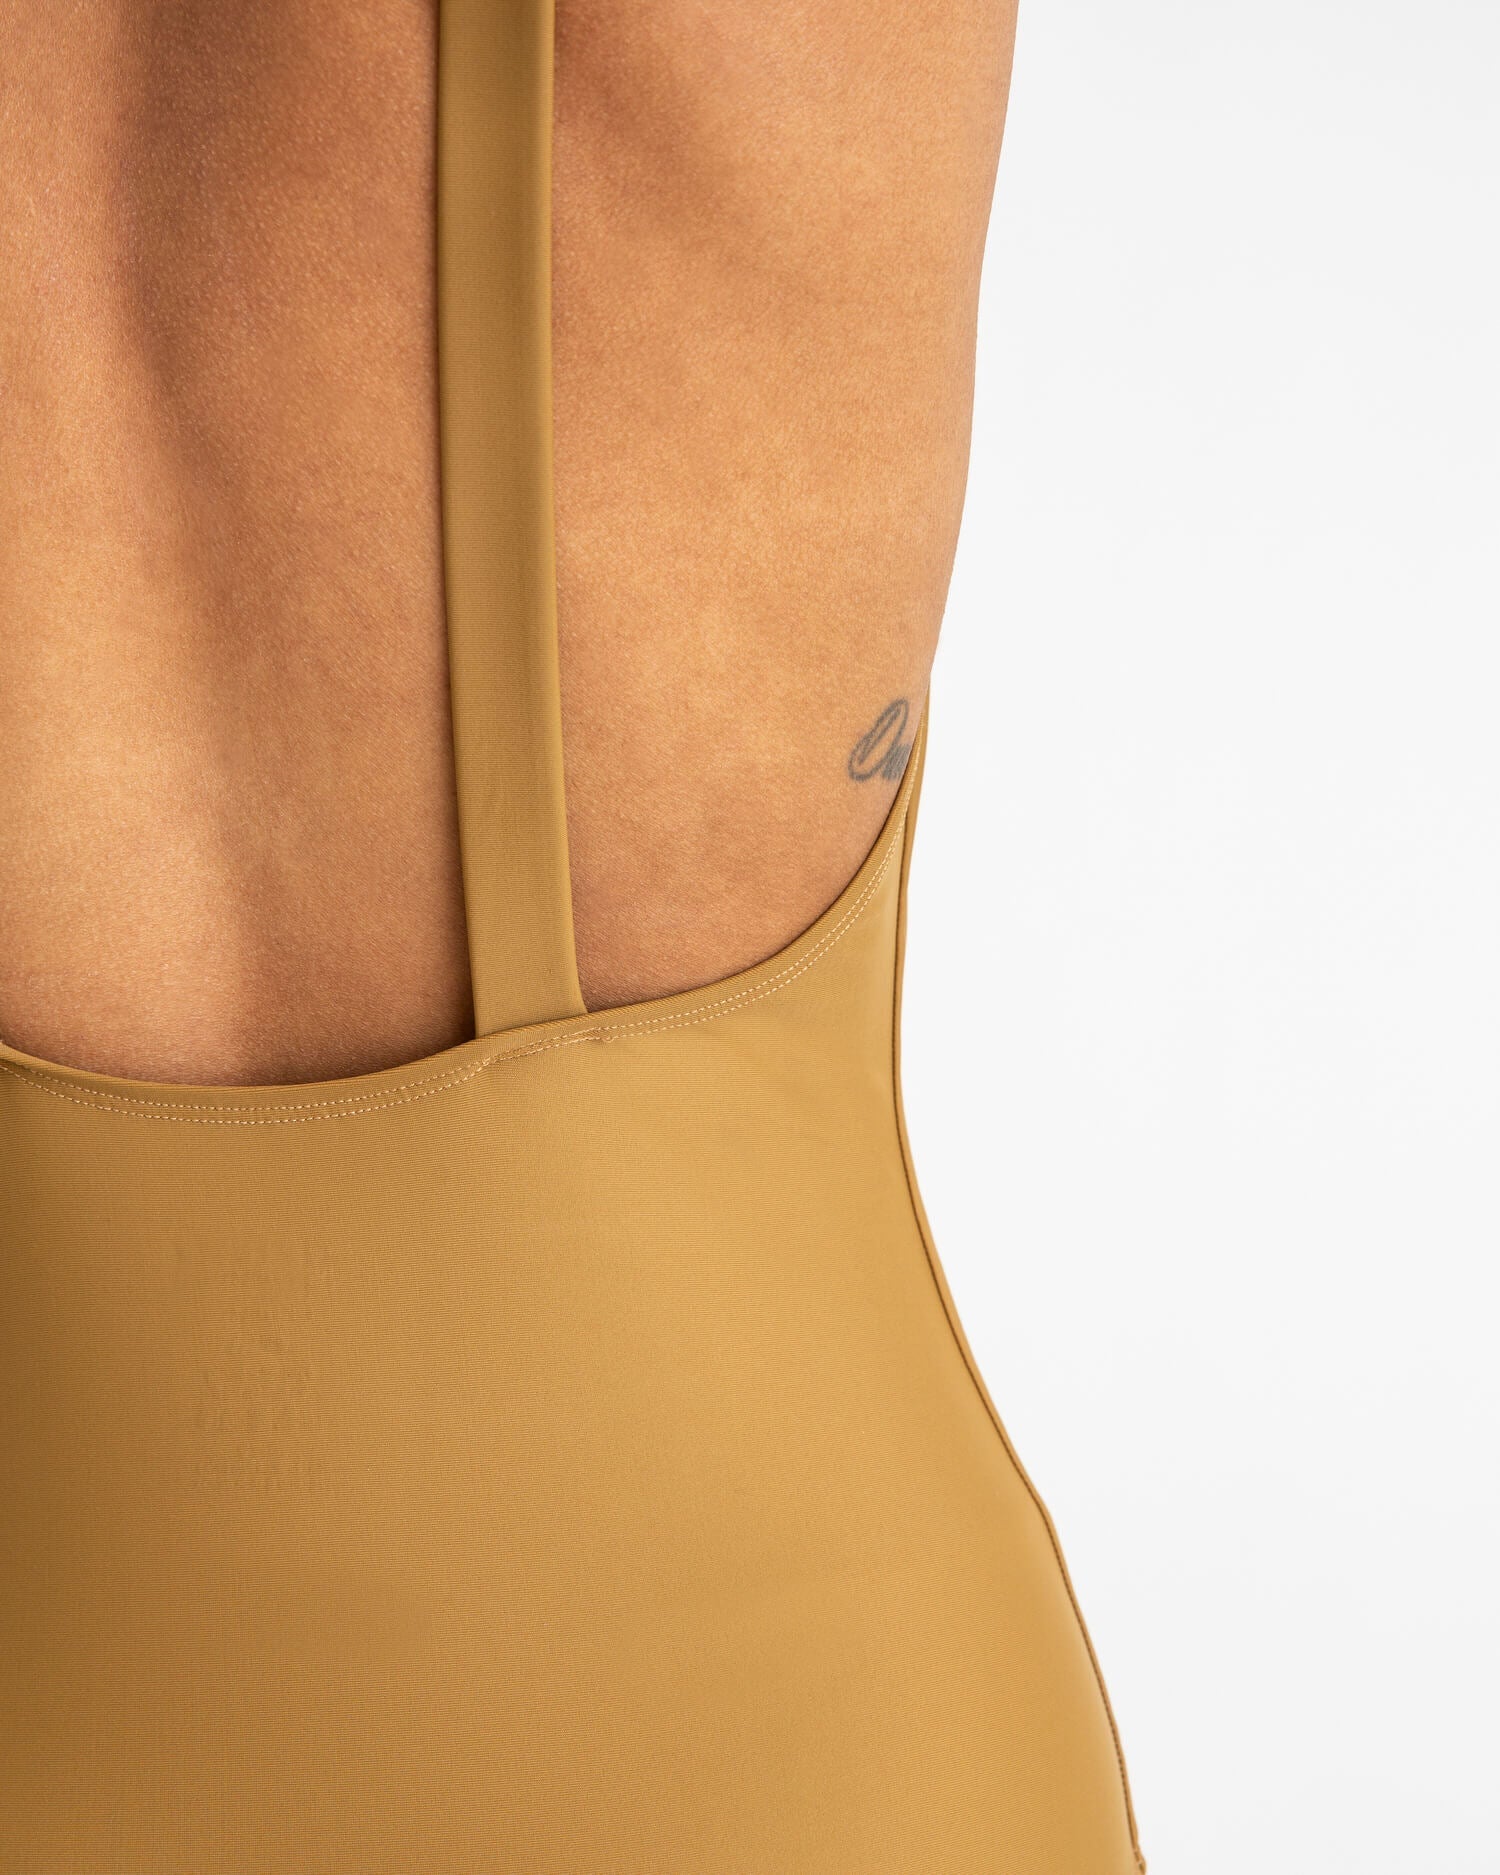 Brown swimsuit made from recycled polyamide from Matona